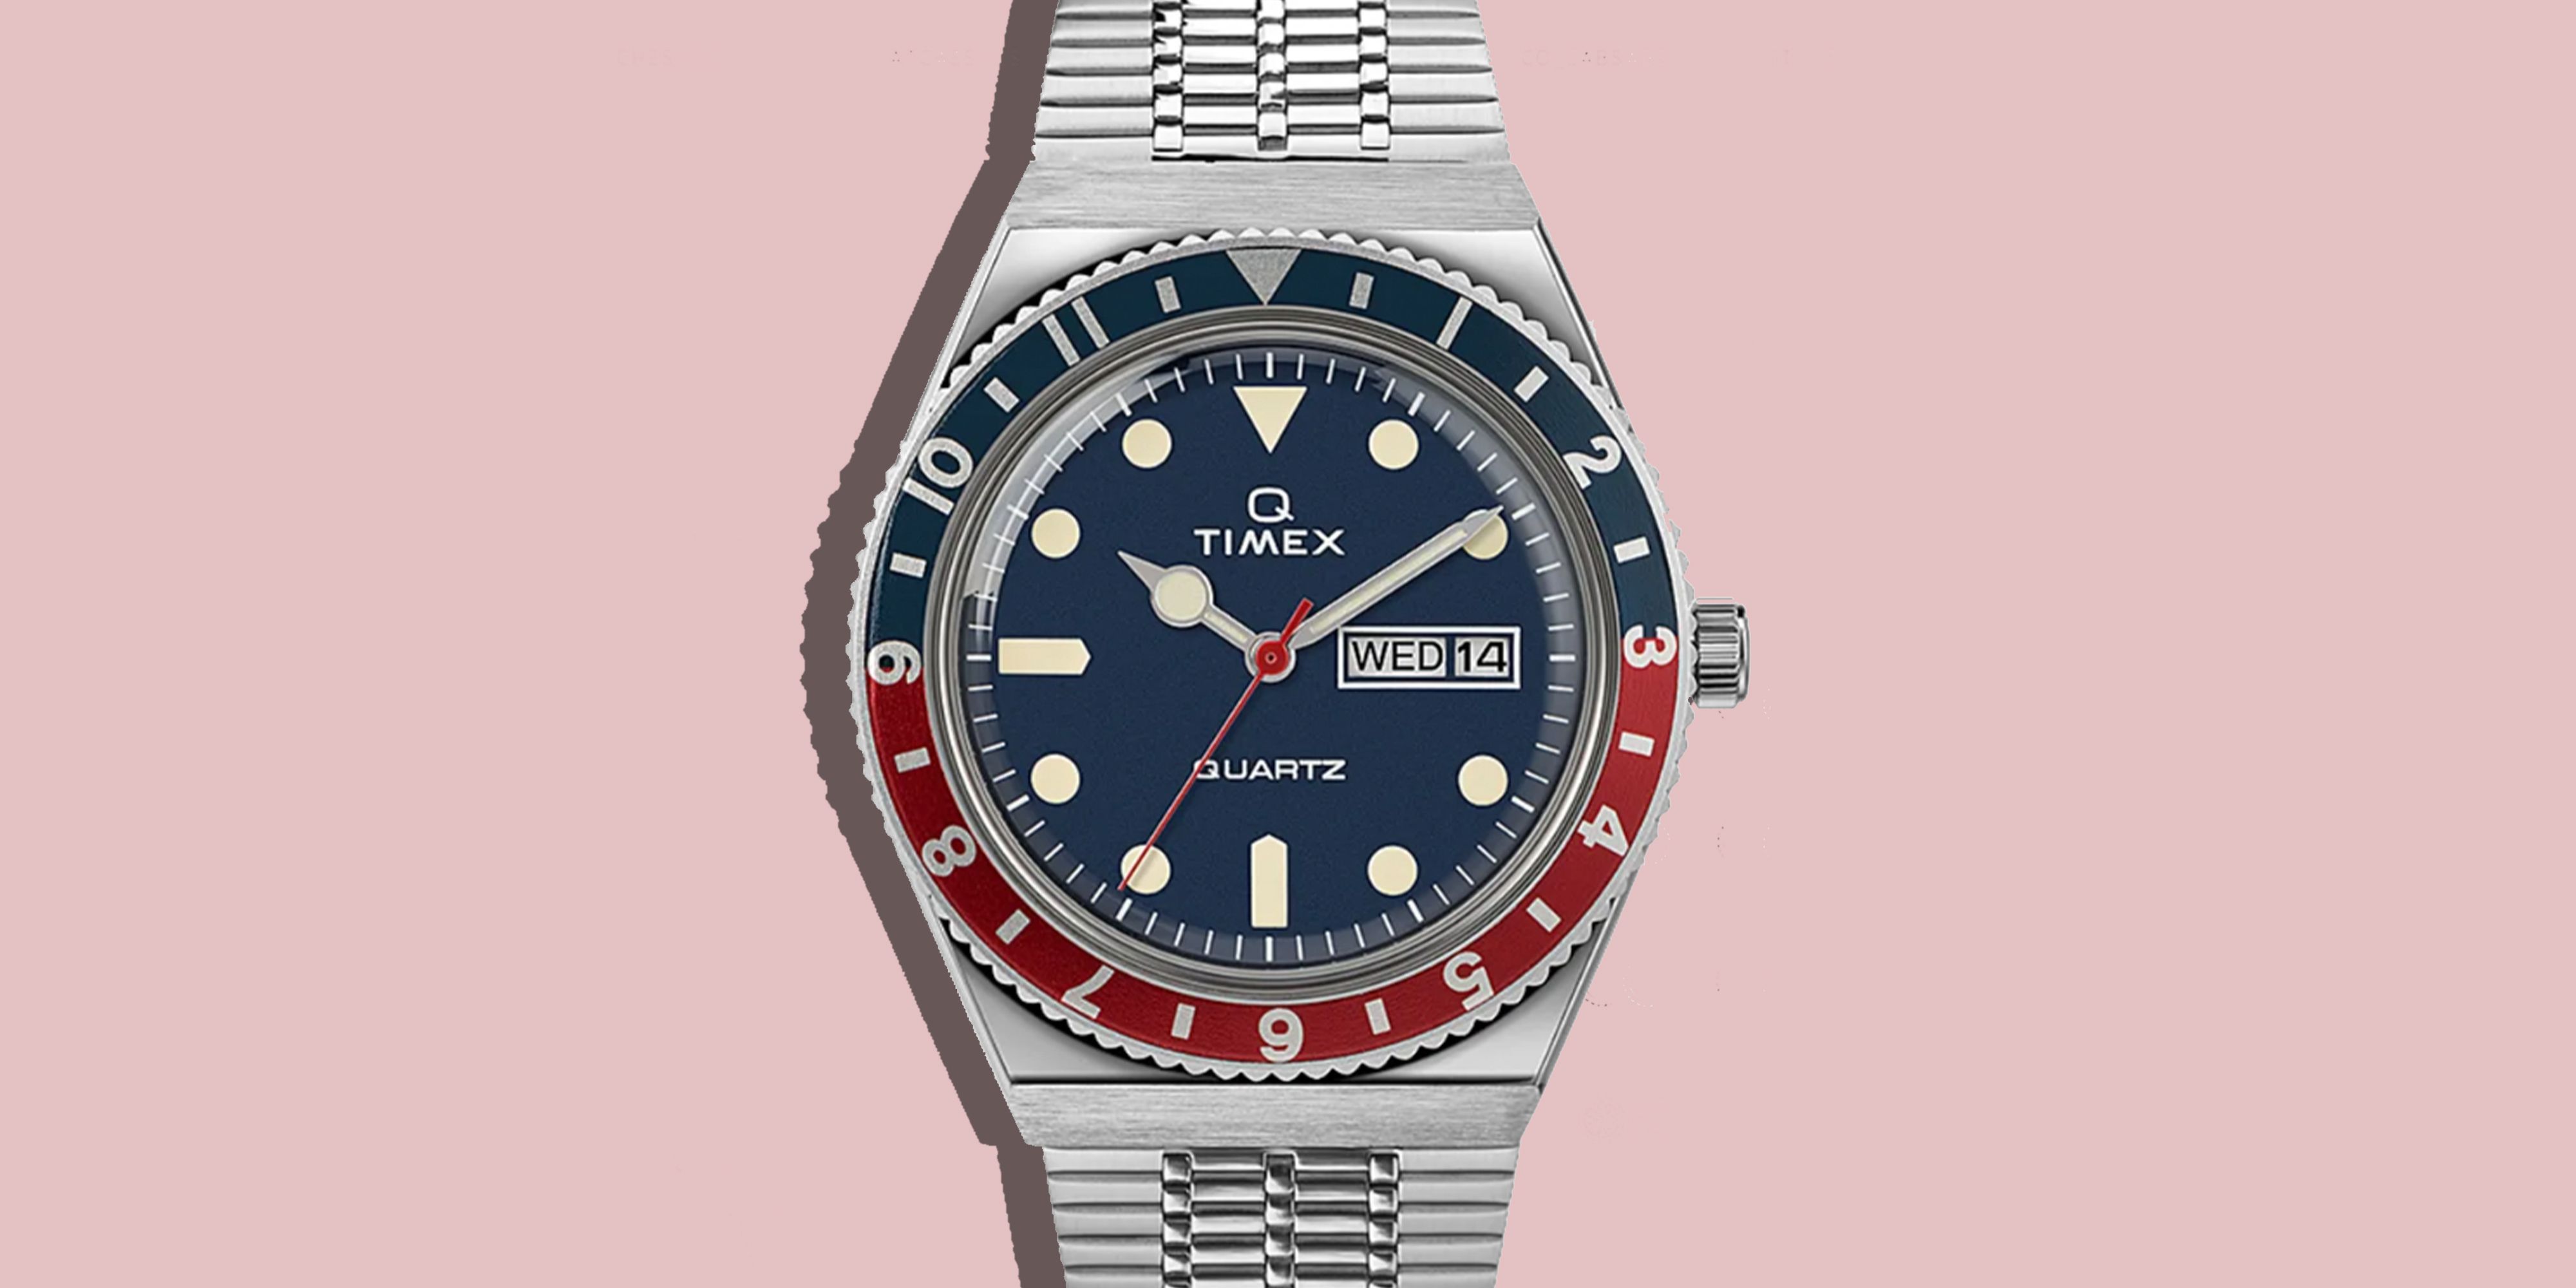 Watches from Timex | Digital, Analog, & Water Resistant Watches | Timex UK